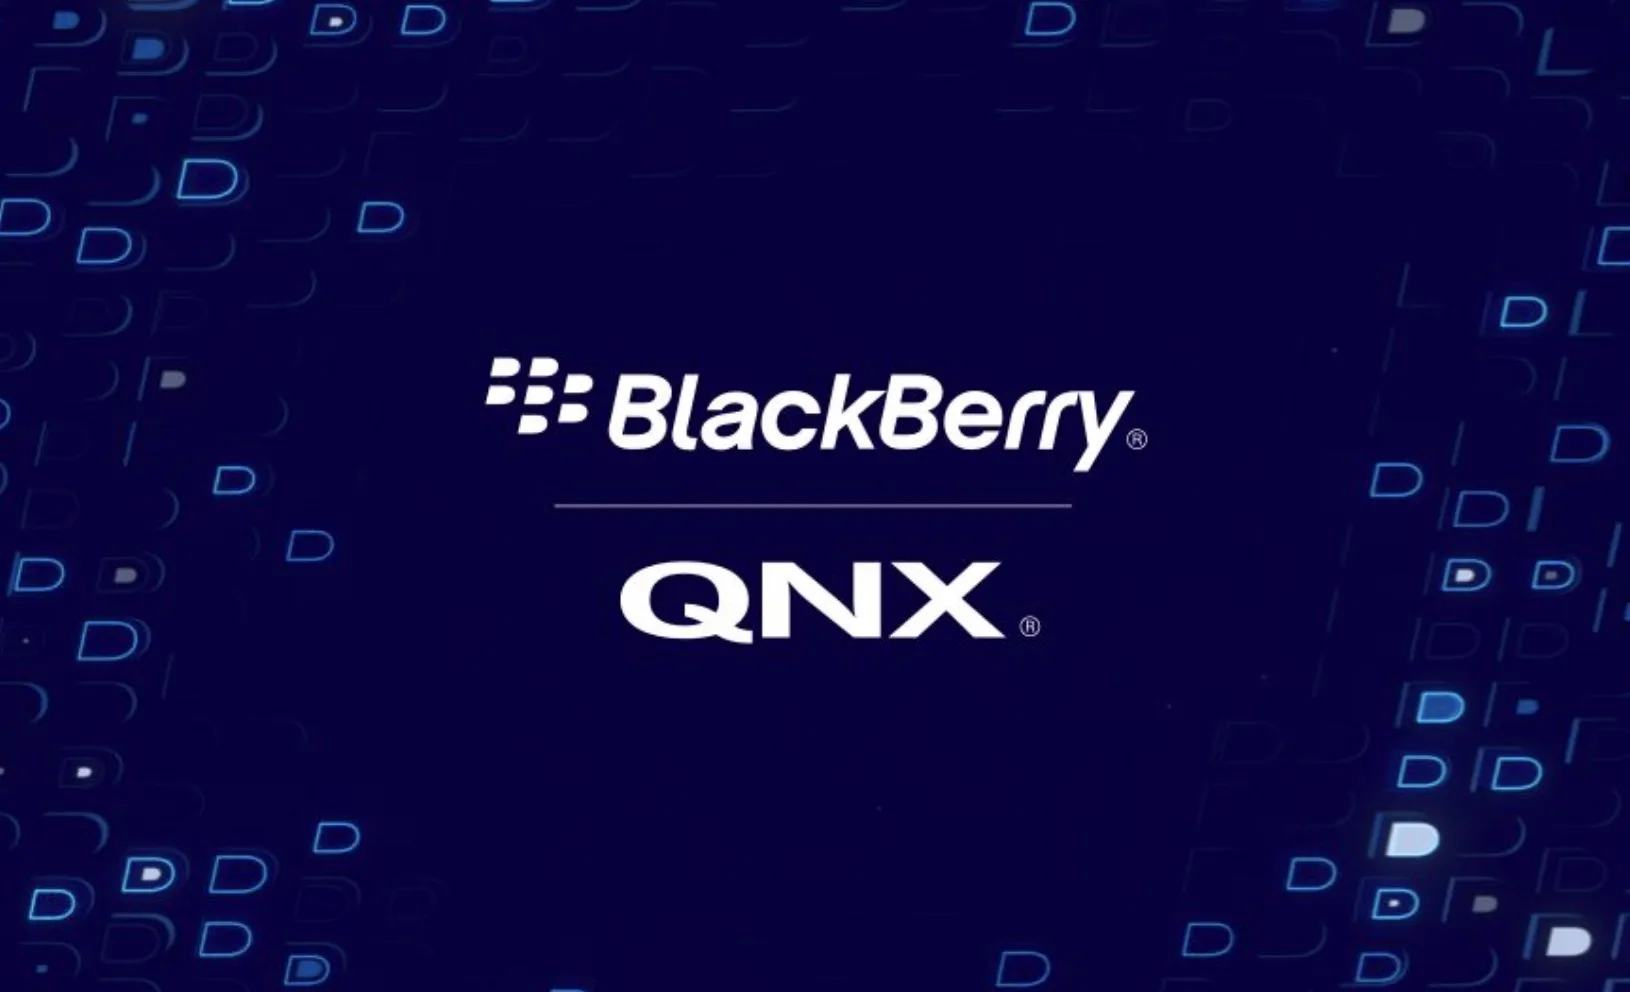 BlackBerry QNX foundational software will be migrated to Amazon Web Services.